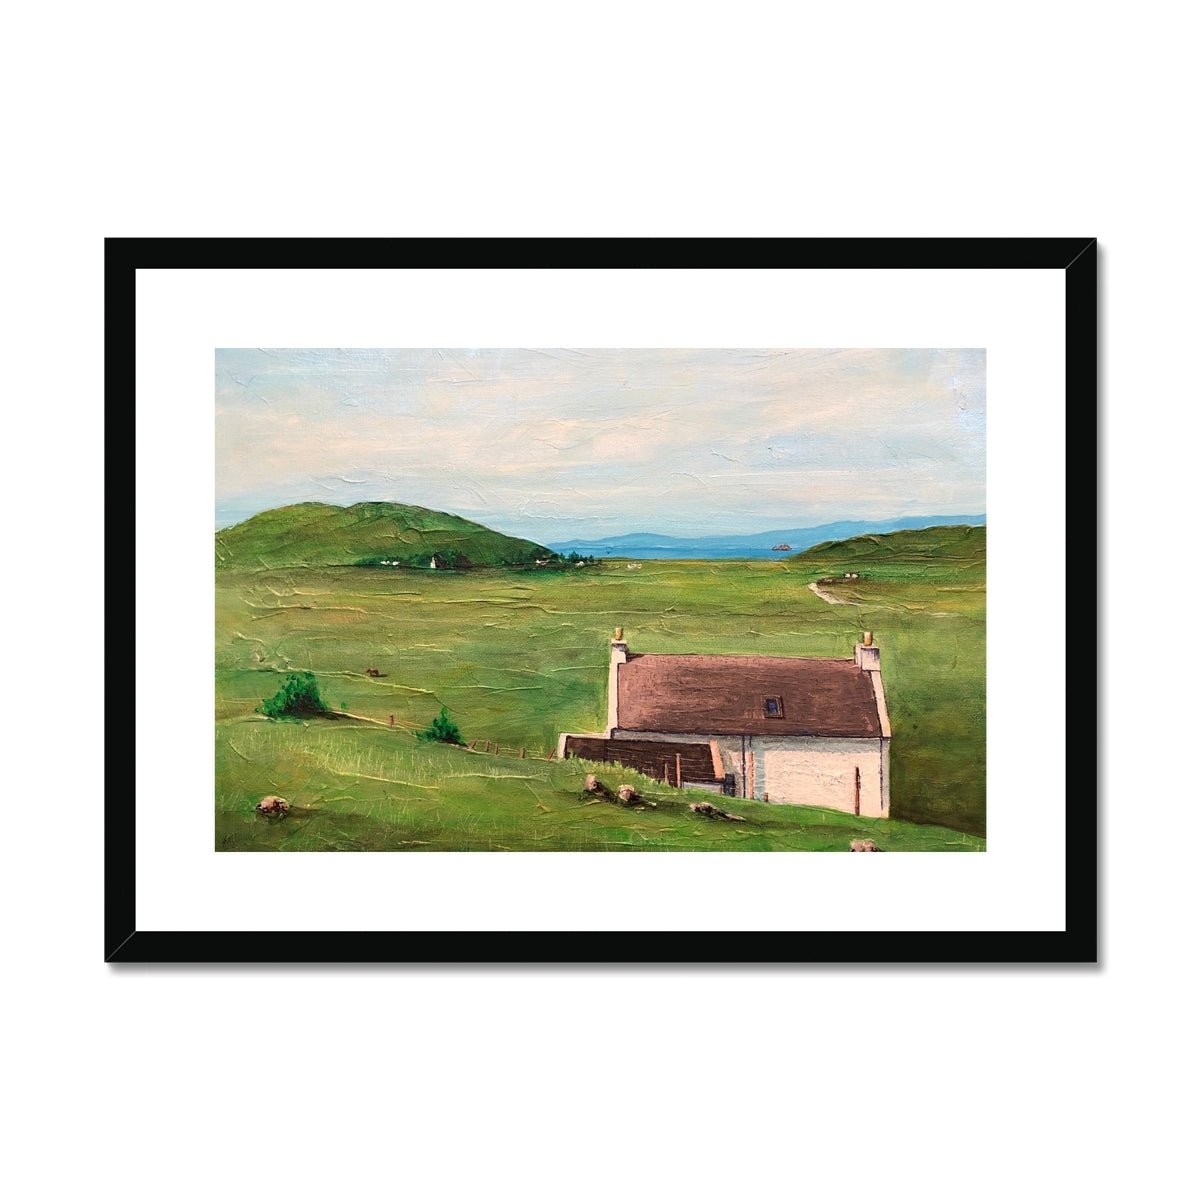 A Skye Cottage Painting | Framed & Mounted Prints From Scotland-Framed & Mounted Prints-Skye Art Gallery-A2 Landscape-Black Frame-Paintings, Prints, Homeware, Art Gifts From Scotland By Scottish Artist Kevin Hunter